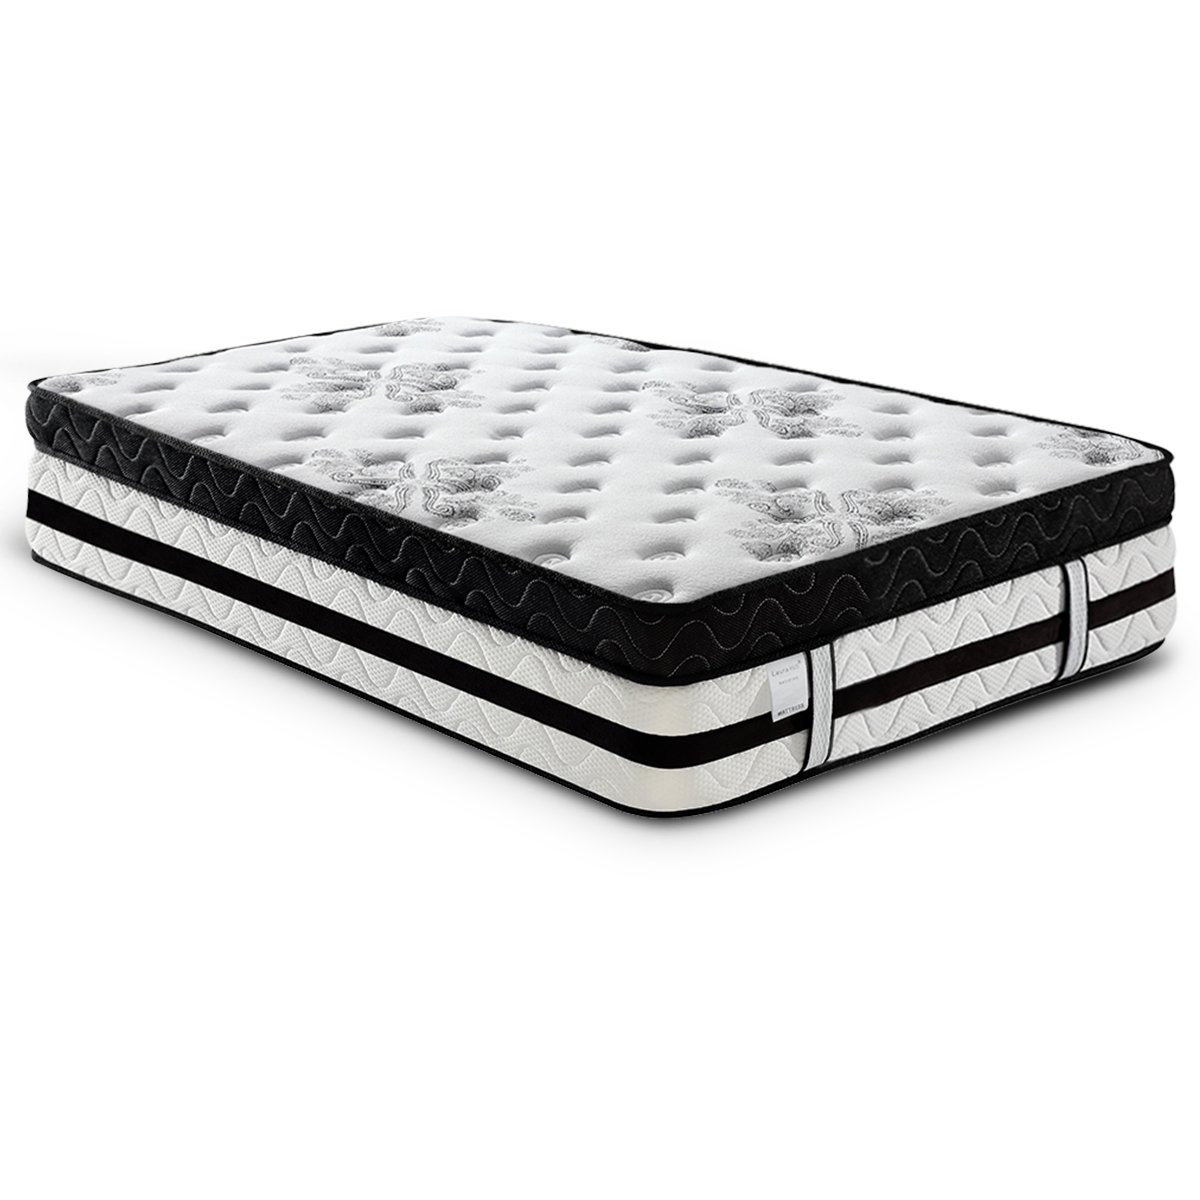 Laura Hill Double Mattress with Euro Top - 34cm 2